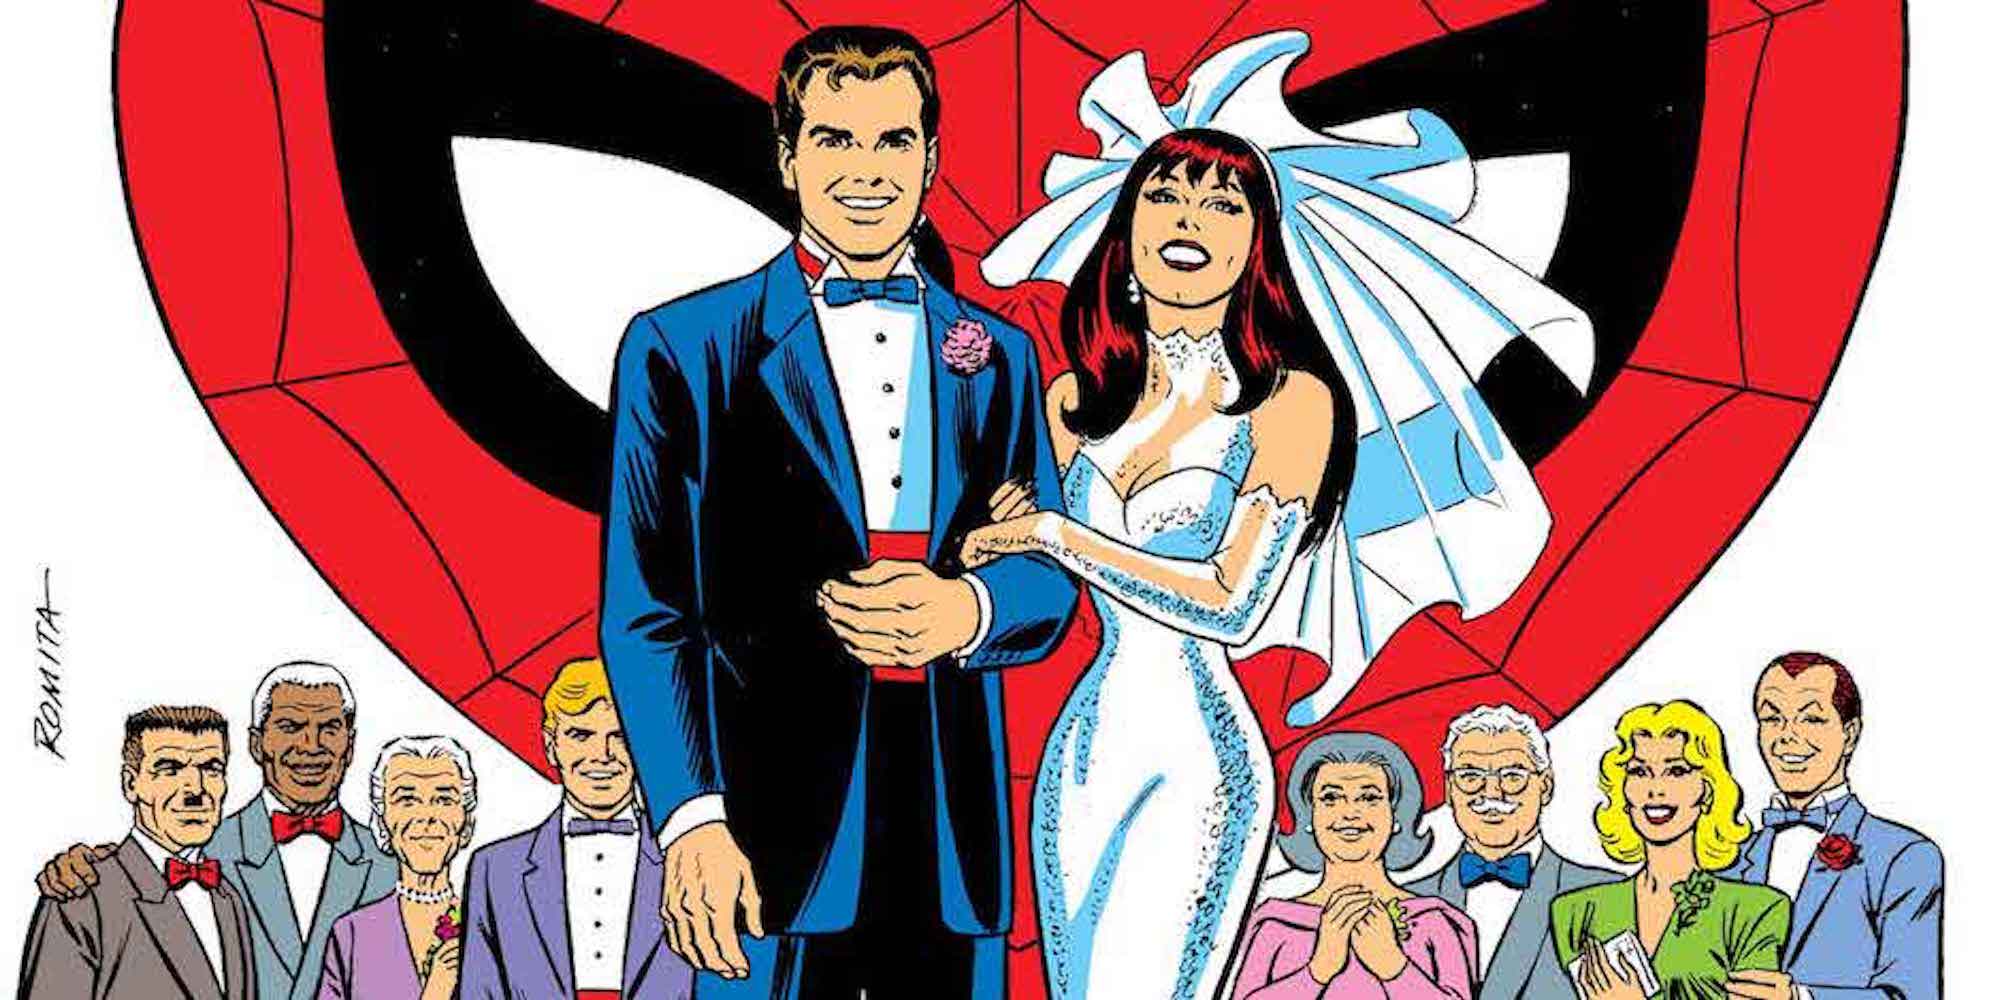 This is an image from Amazing Spider-Man Annual #21 (1987), where Mary Jane holds Peter Parker's arm in front of their wedding guests.